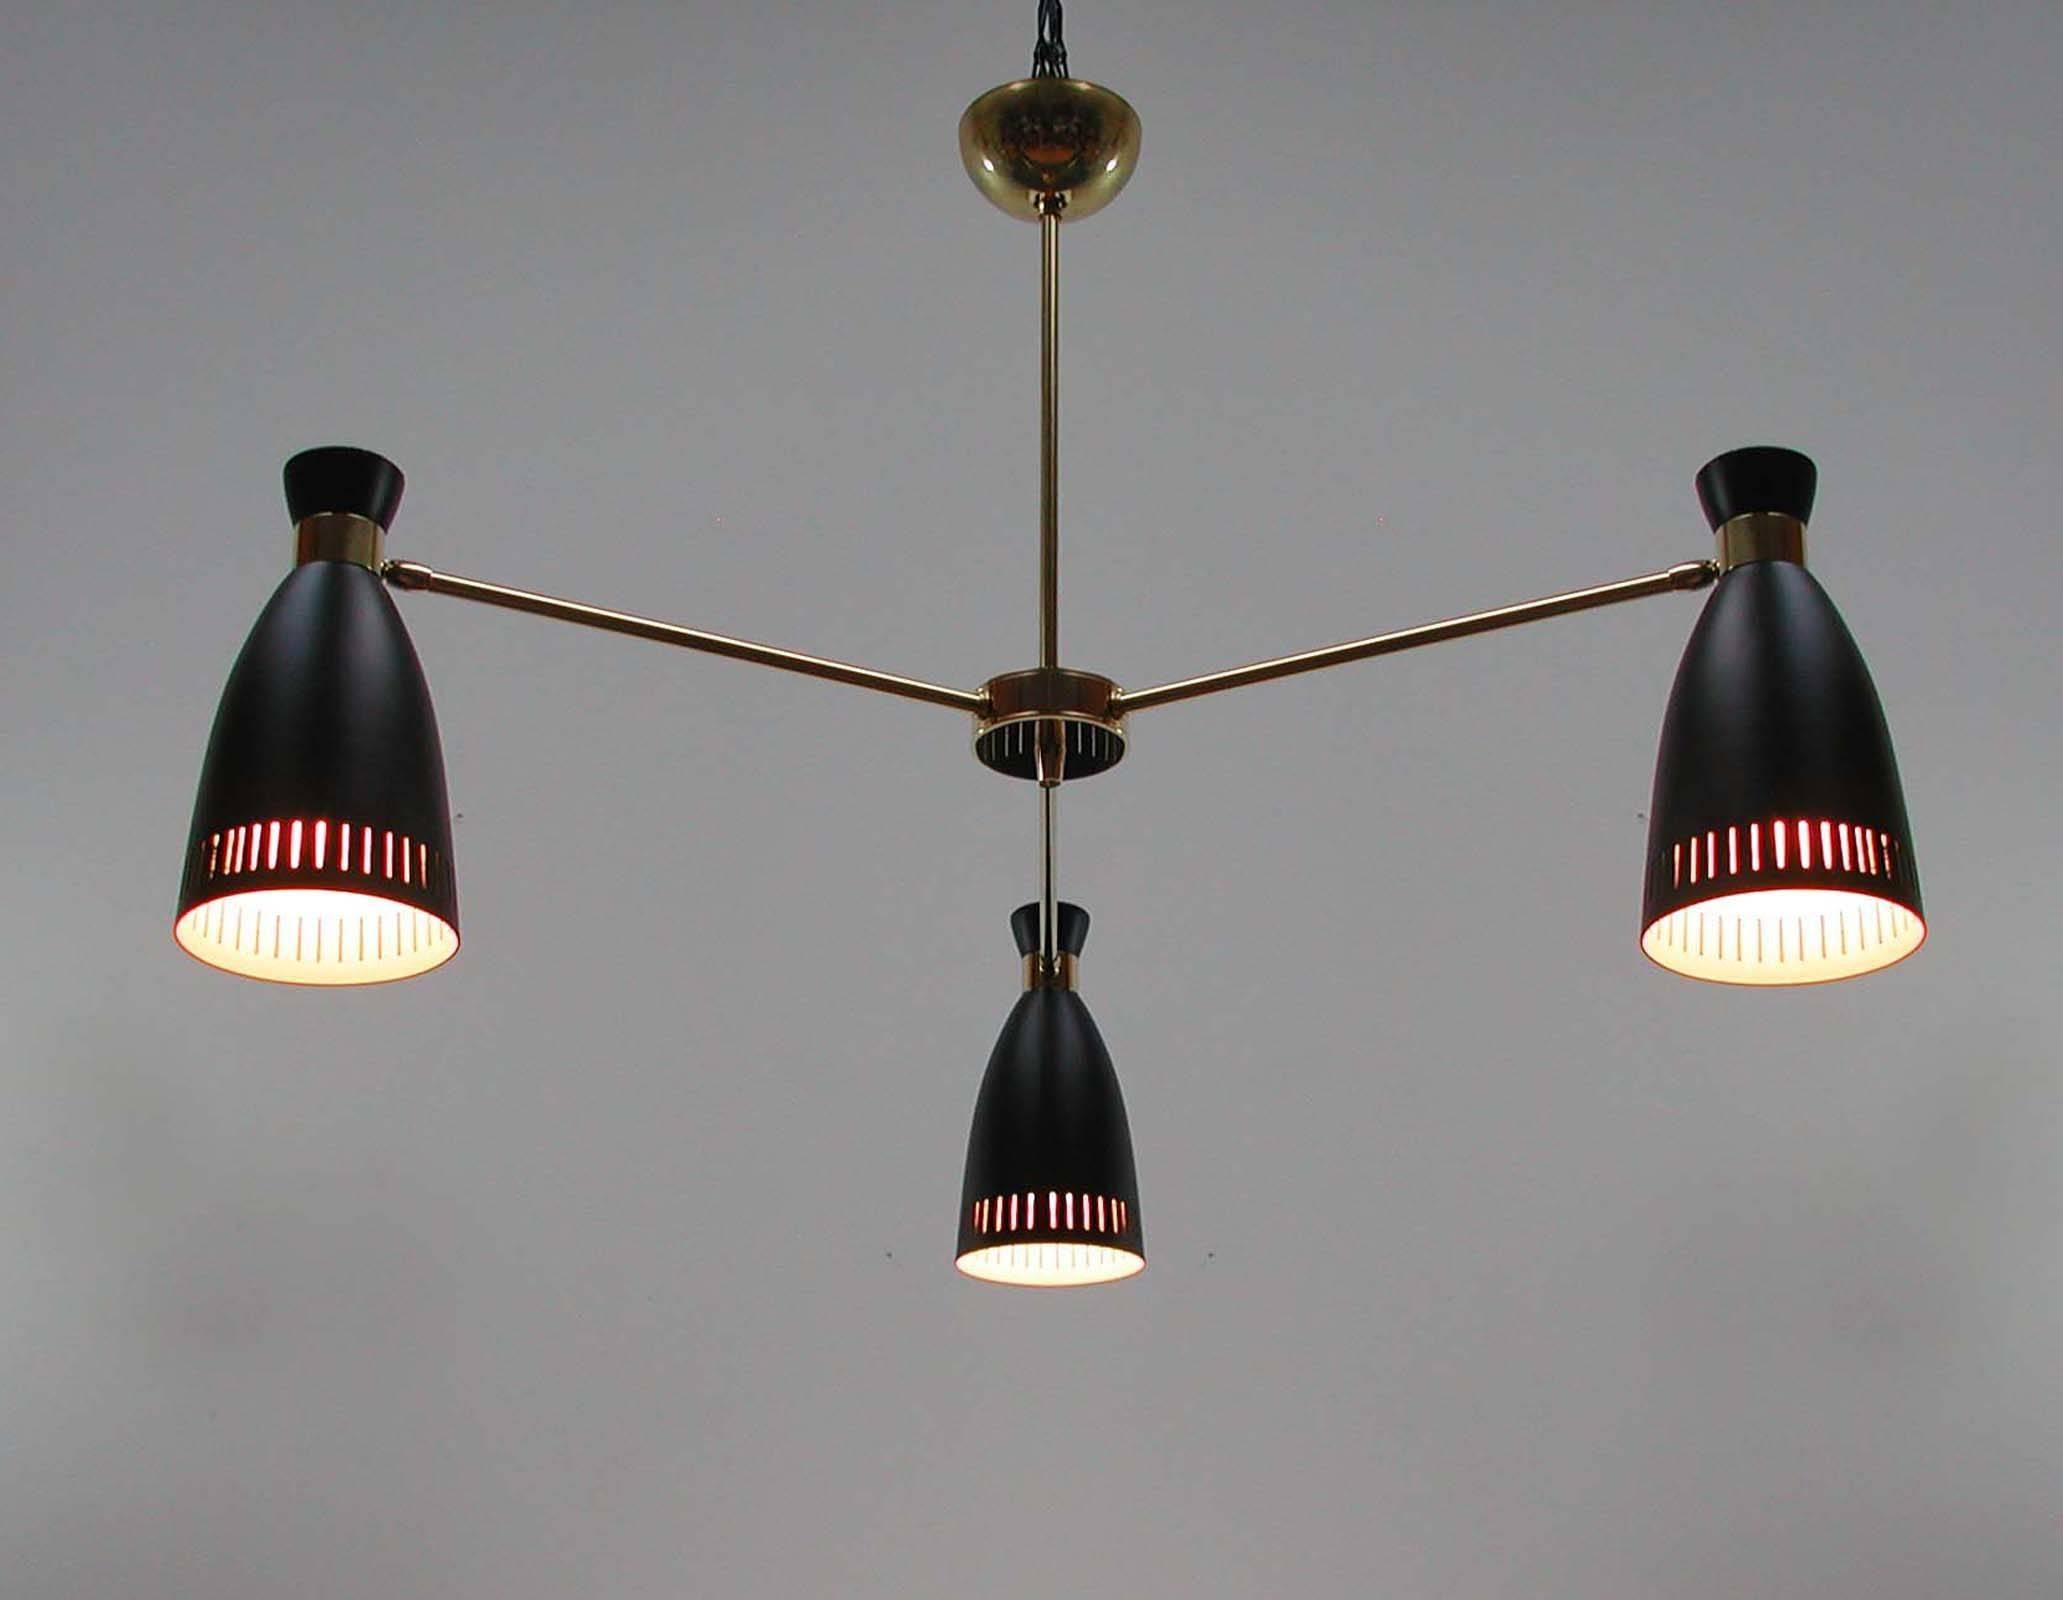 This three-tier chandelier was manufactured in Italy in the 1950s. It has got three adjustable cone shaped black lacquered metal lampshades and brass Sputnik lamp arms.

The chandelier is in excellent condition with minor signs of use and age and